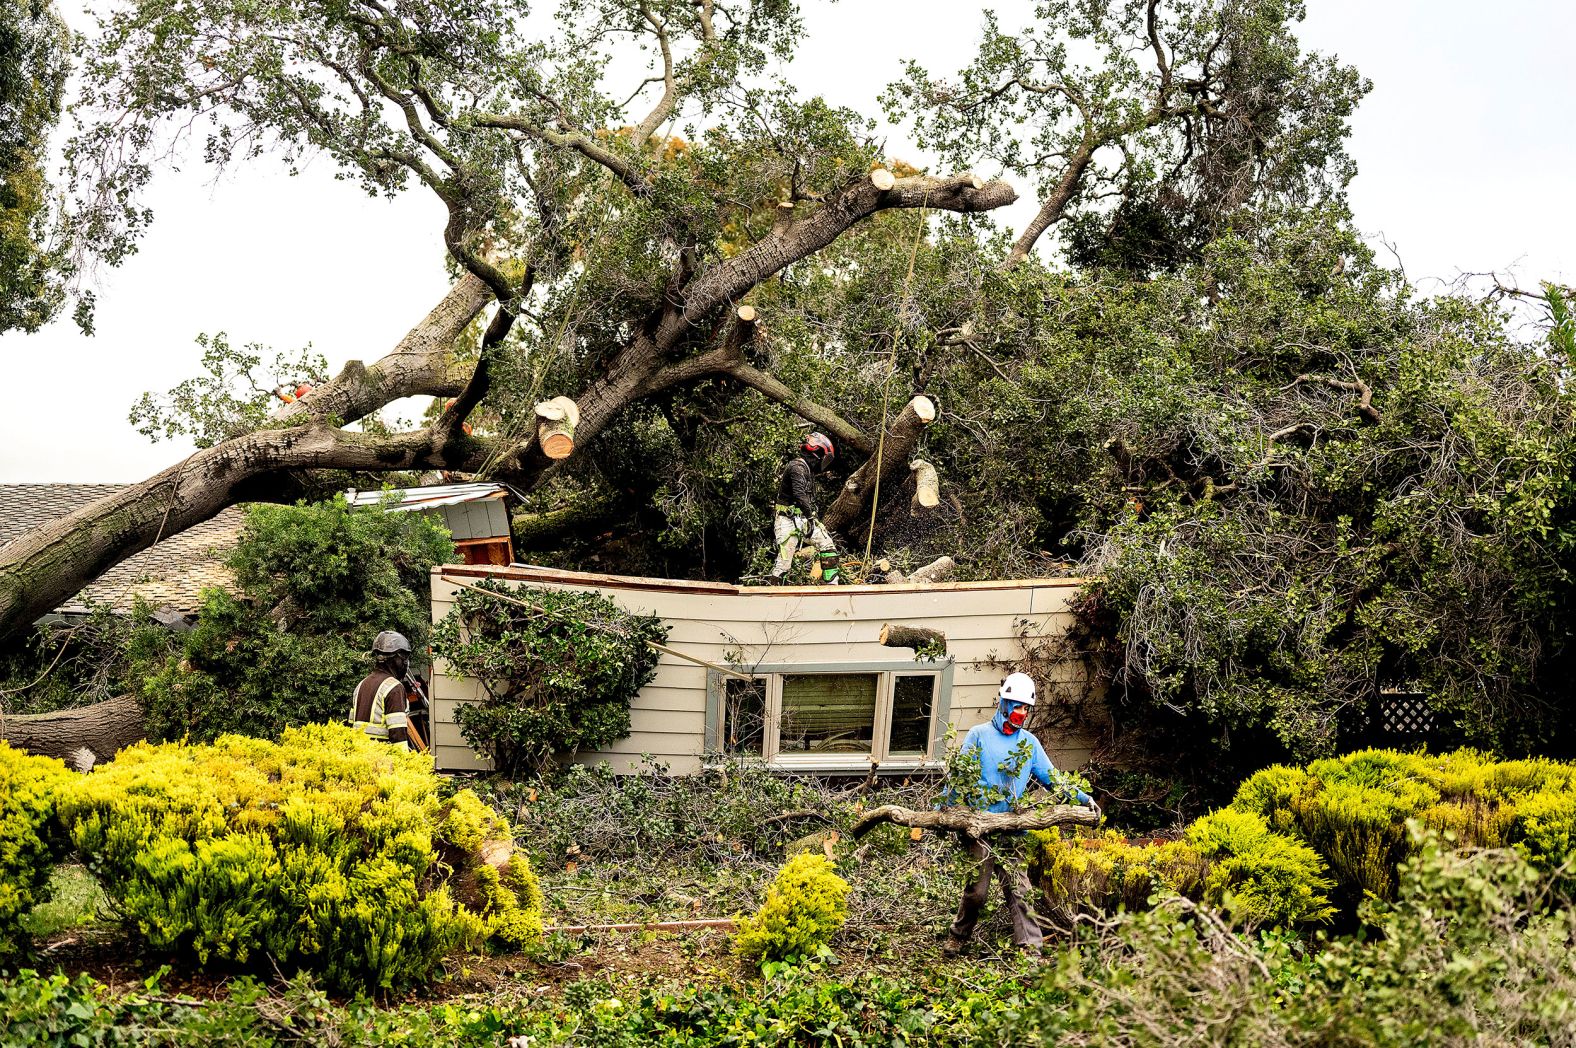 Workers clear a tree that fell onto a home during heavy wind and rain in San Jose, California, on Sunday, February 4. An atmospheric river started making landfall across California on Sunday, <a href="index.php?page=&url=https%3A%2F%2Fus.cnn.com%2Fus%2Flive-news%2Fcalifornia-atmospheric-river-flooding-rain-02-05-24%2Findex.html">bringing strong winds and extreme rainfall</a>.